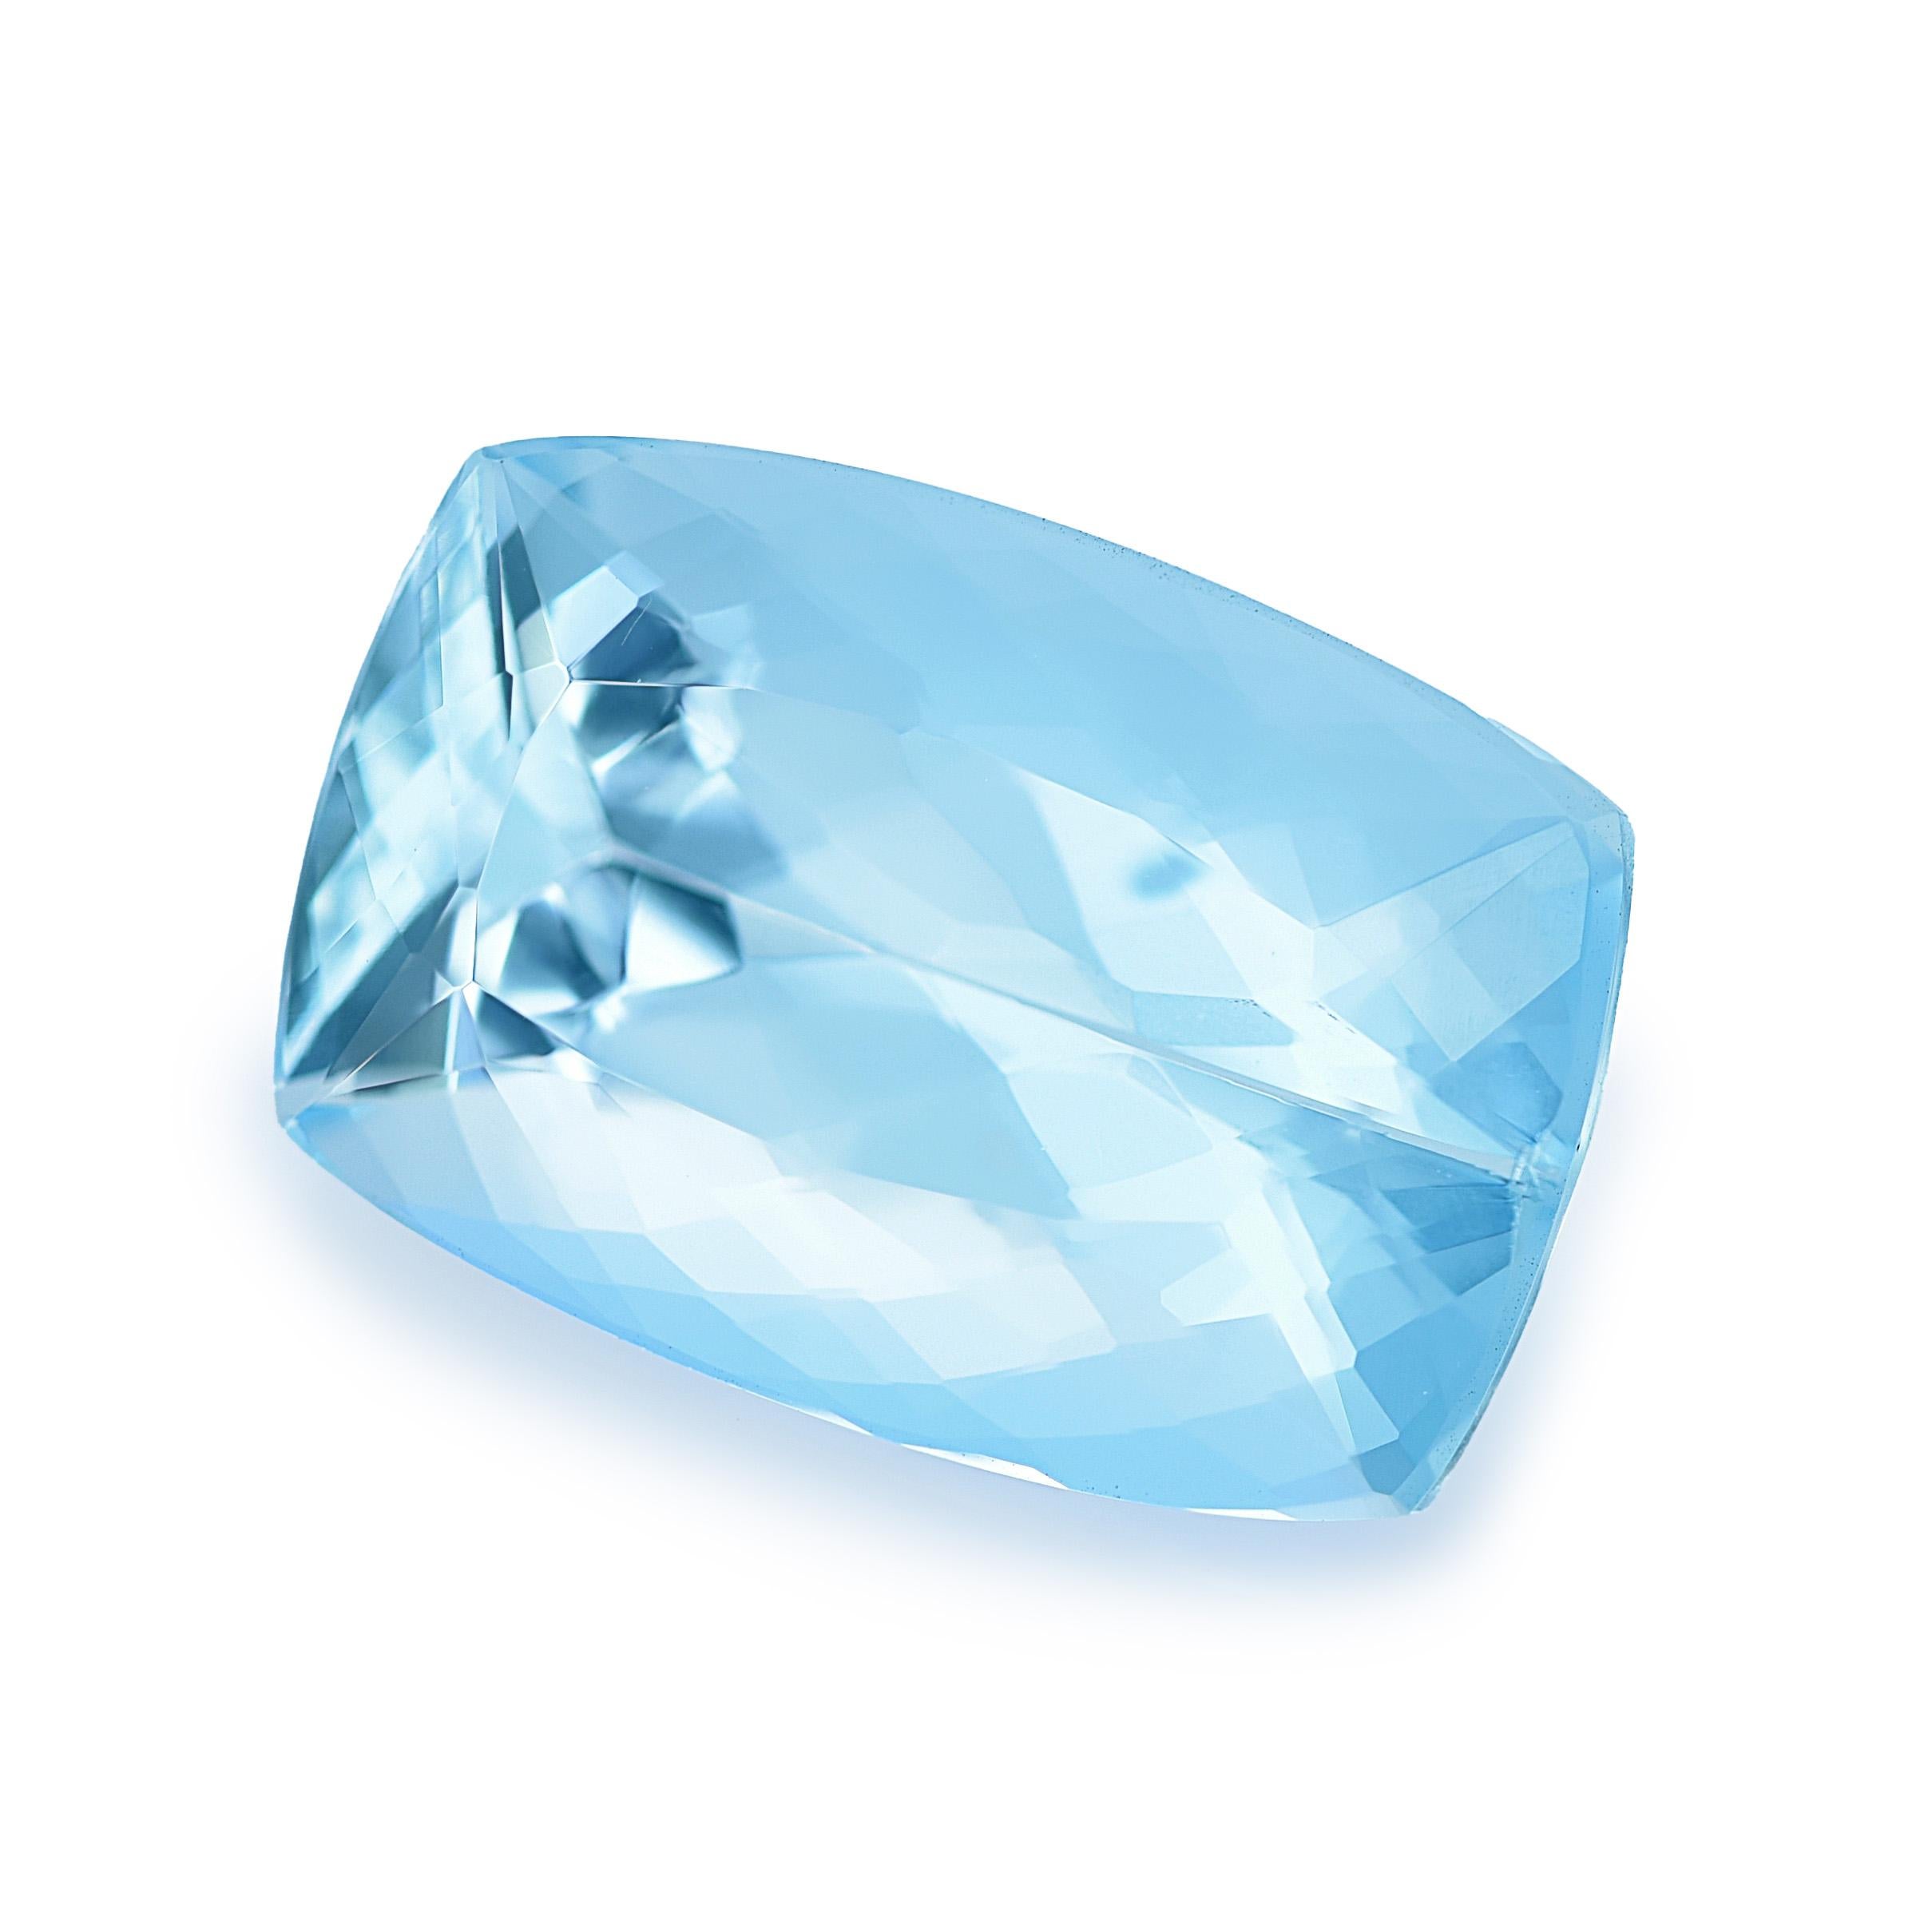 Unveil the charm of a 7.21 carats Natural Aquamarine, showcasing a cushion shape and Brilliant/Step cut for enhanced brilliance. Measuring 15.29 x 10.08 x 7.12 mm, this gem captivates with its soothing Light Blue color. With very eye-clean clarity,